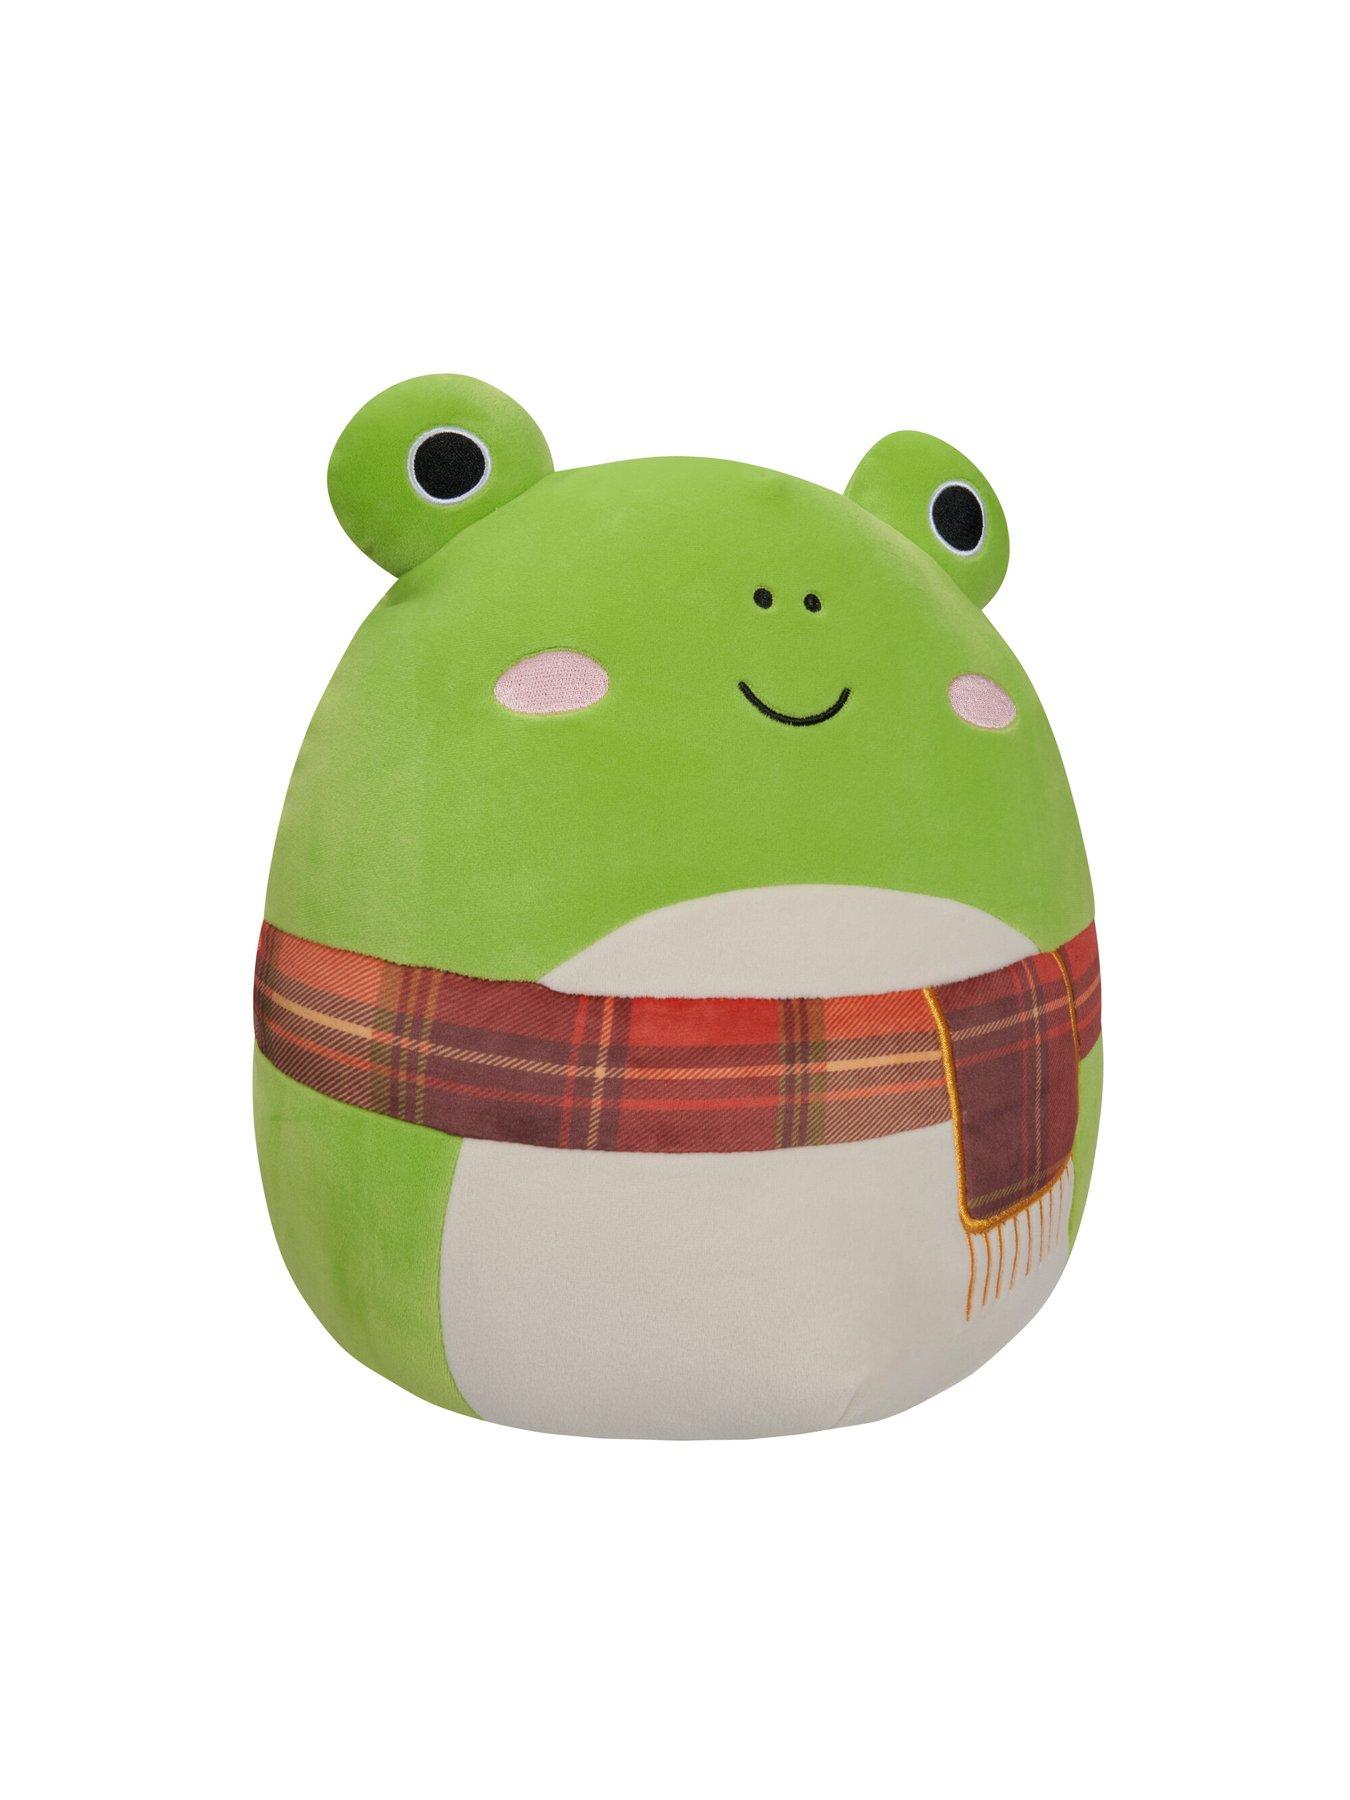 Squishmallows Original Squishmallows 12-Inch Wendy the Green Frog